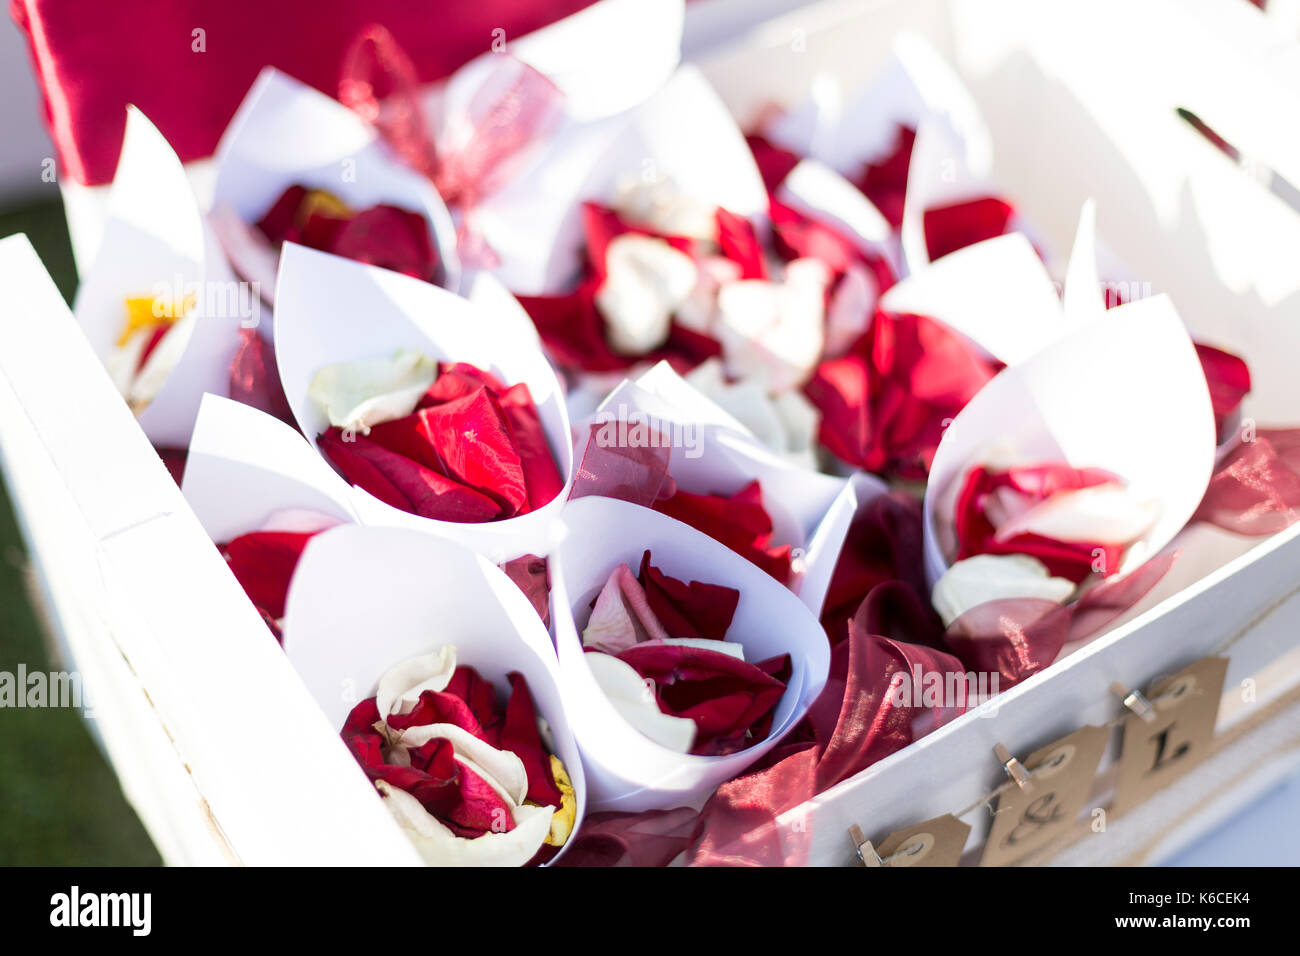 Rose petals ready for the wedding in white papers Stock Photo